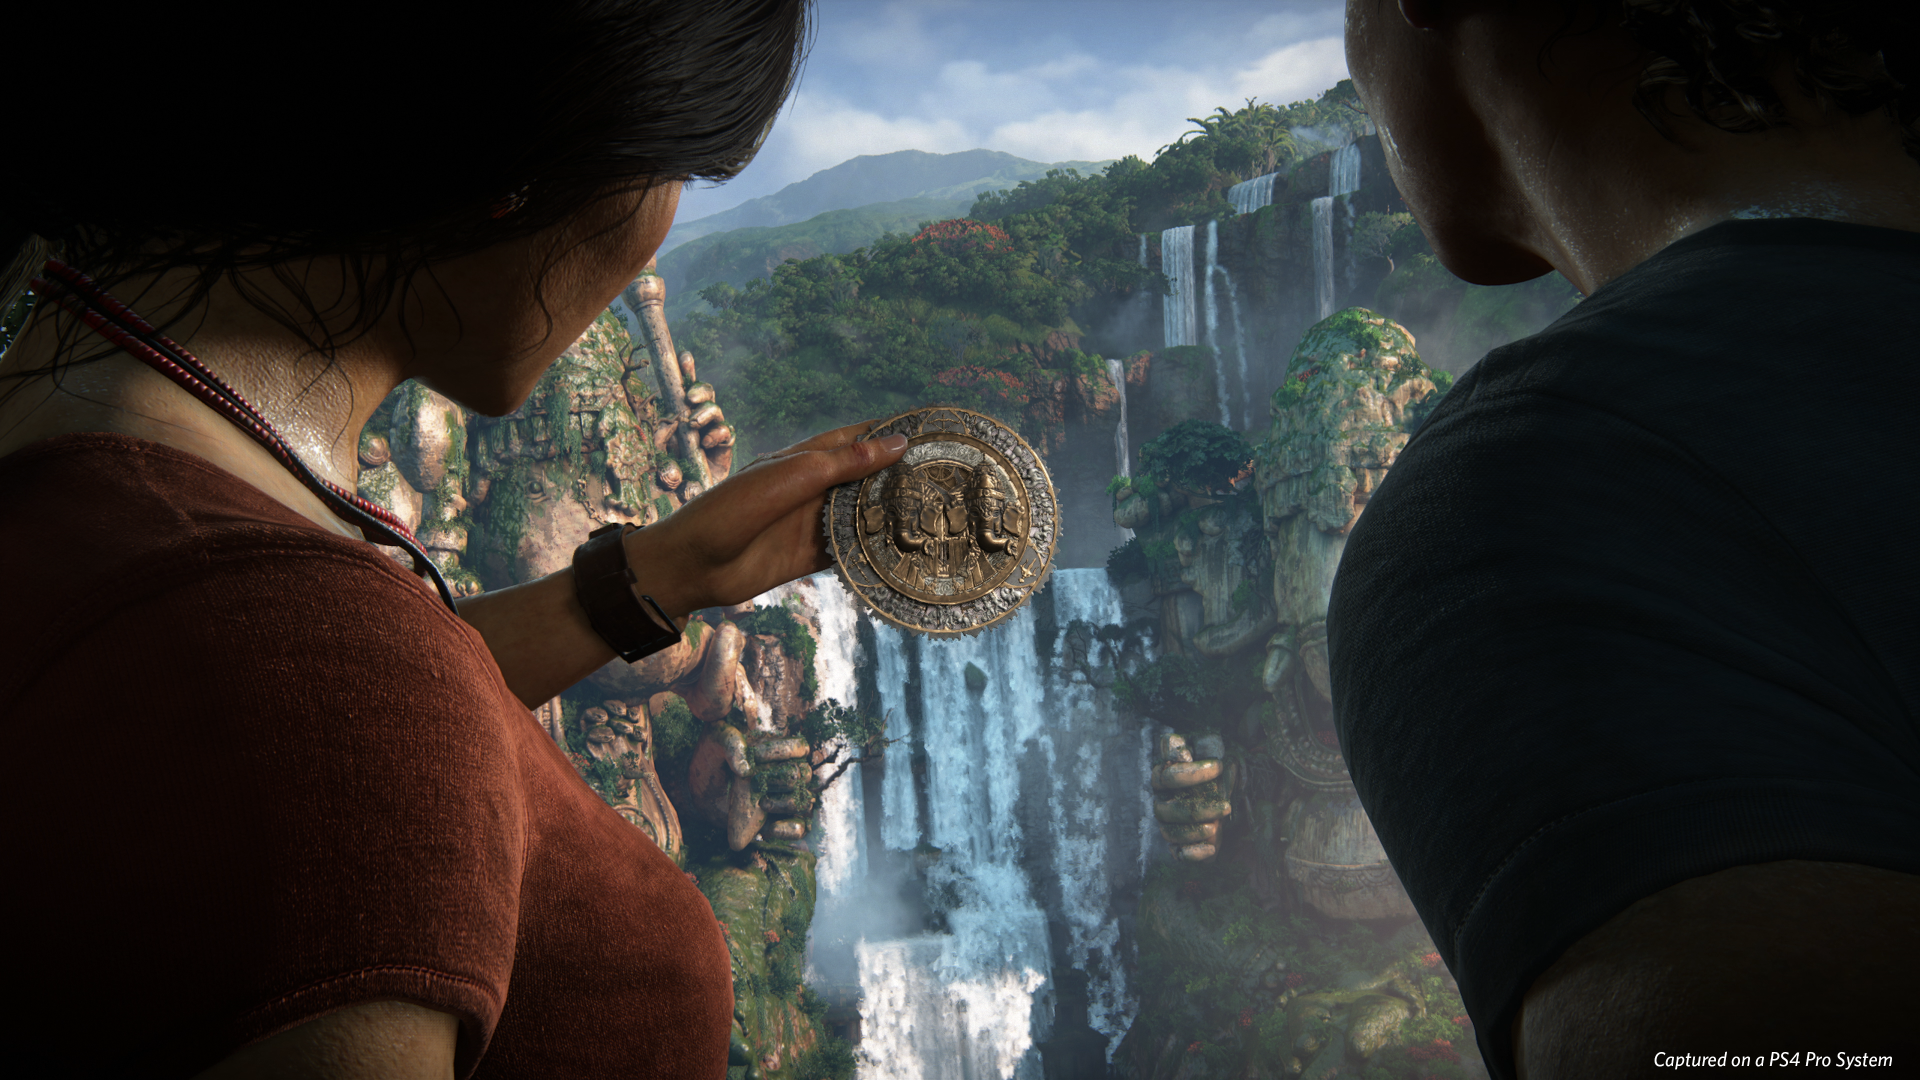 uncharted lost legacy reddit download free